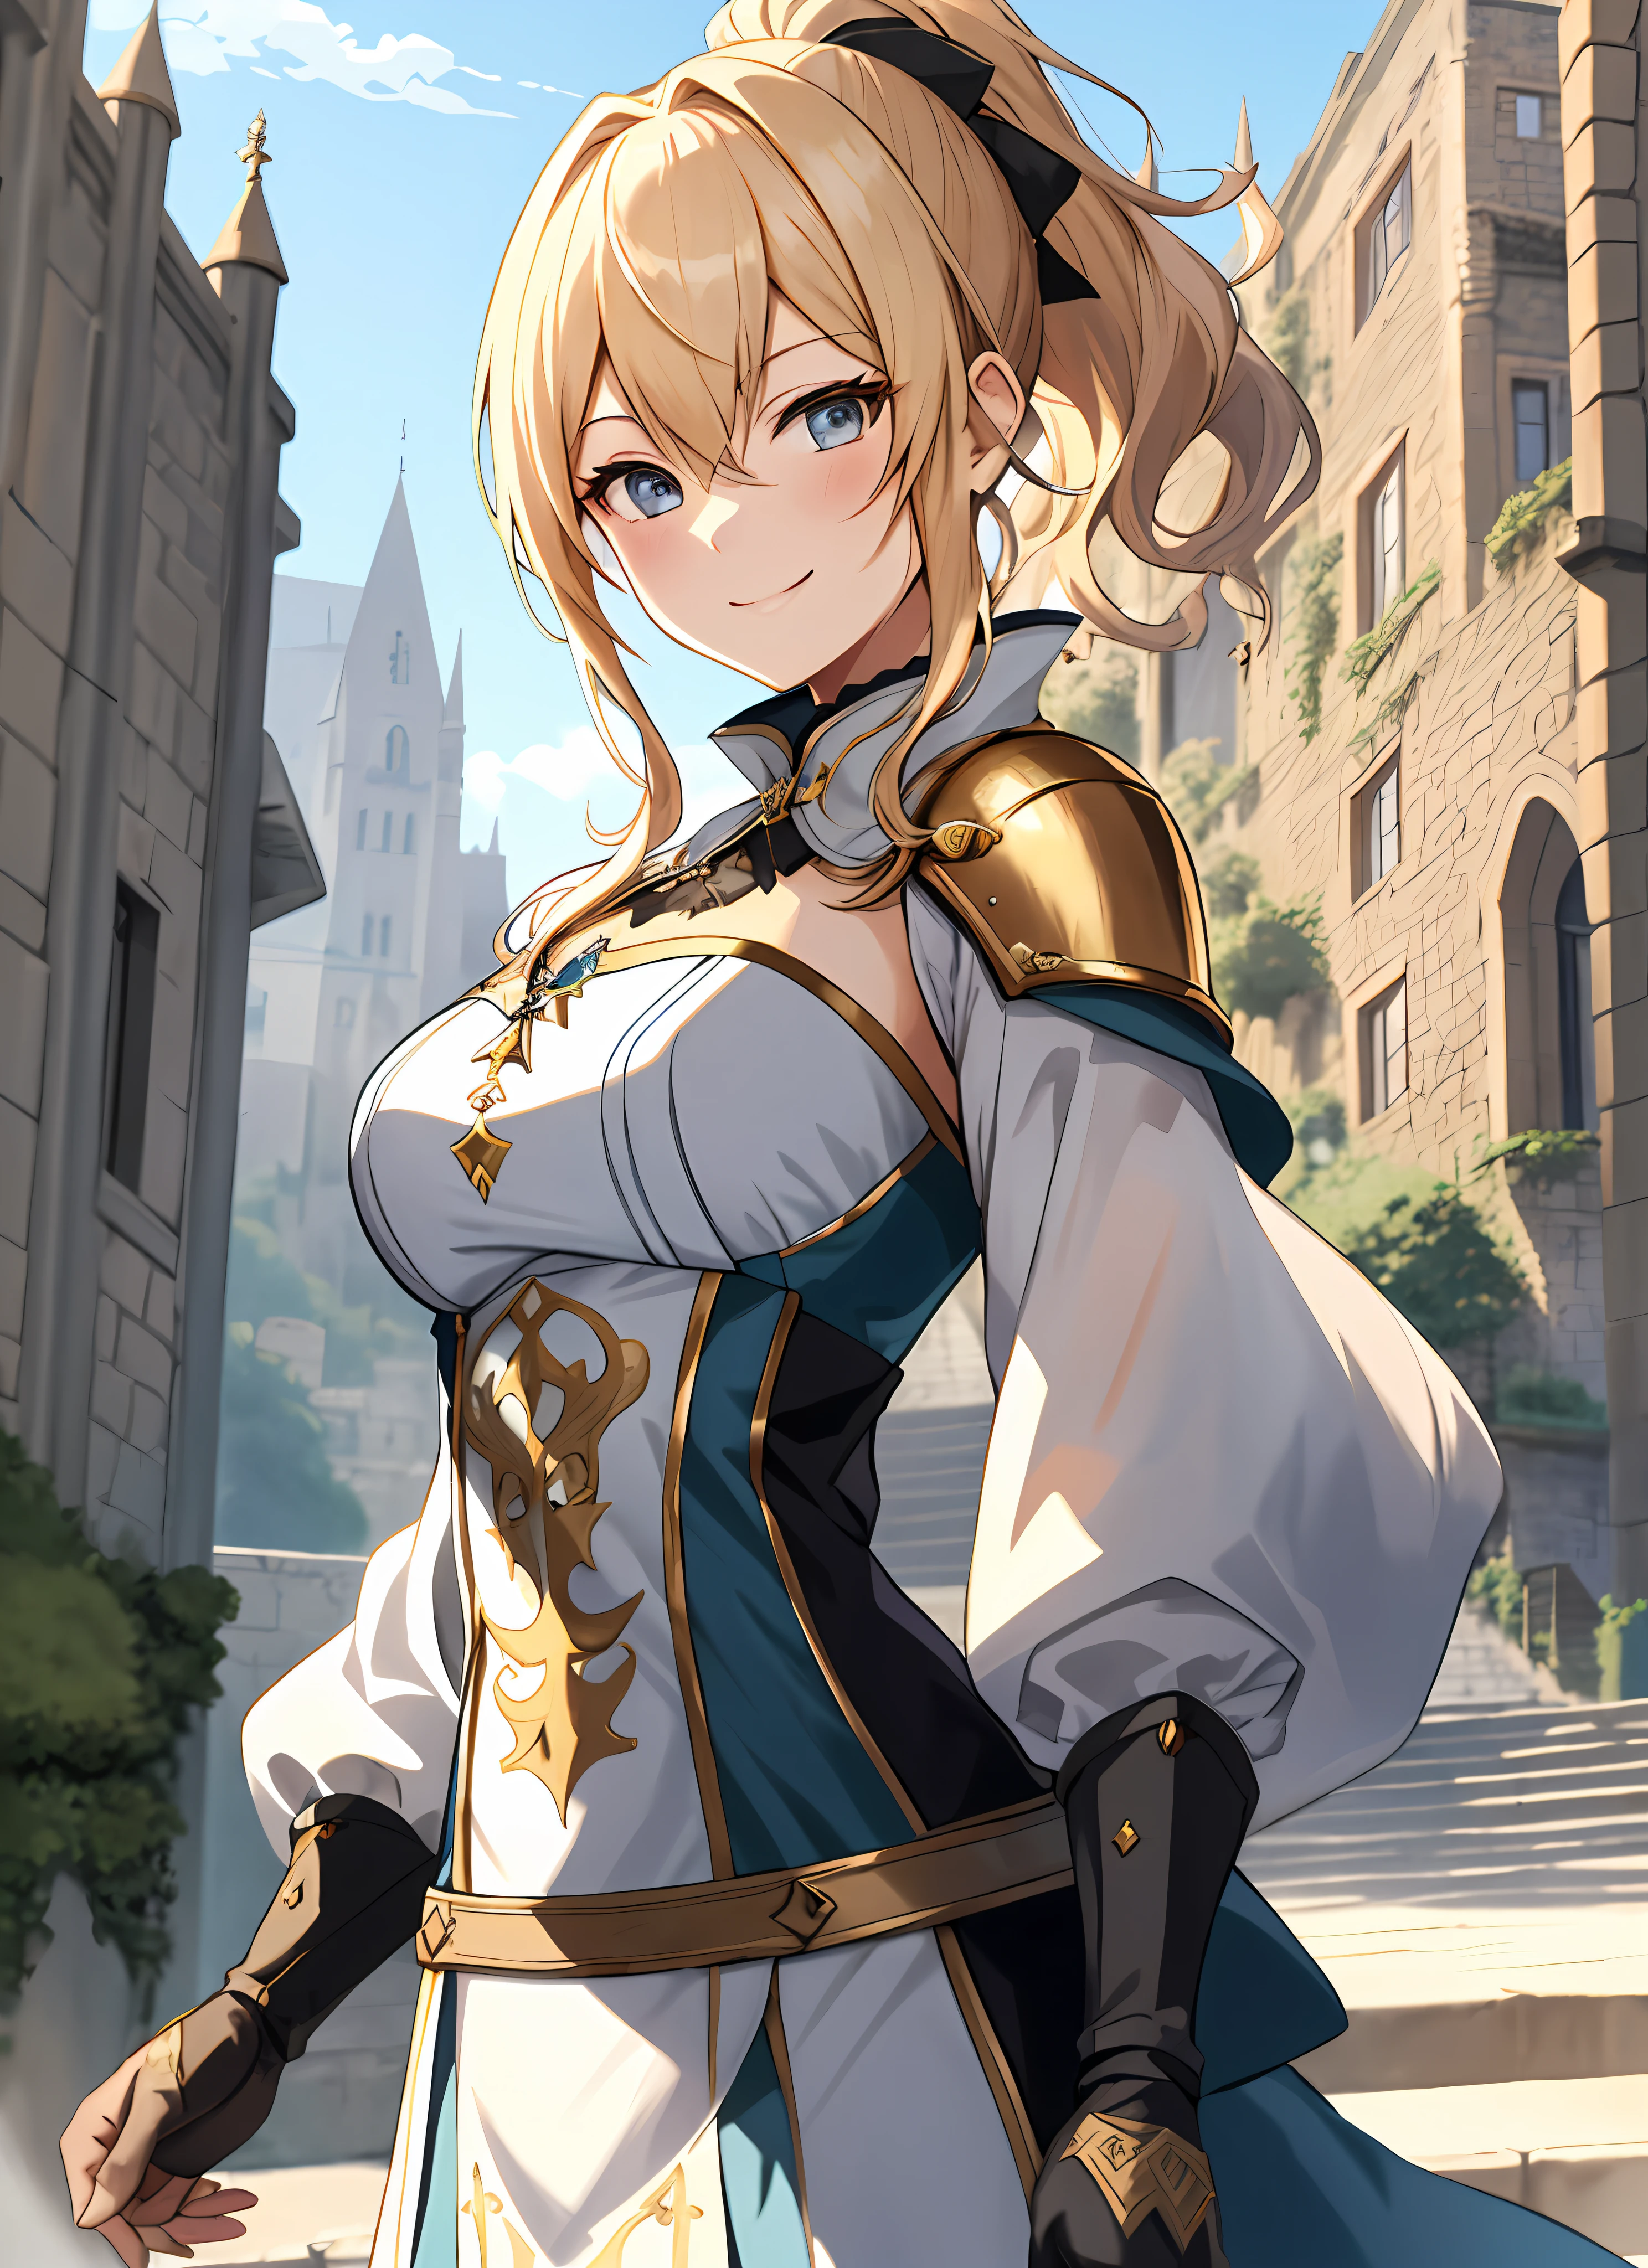 Elegant anime female character, golden ponytail, smile, blush, medieval knight aristocratic costume, outdoor, daytime,  background, blue sky, sky, medieval castle, looking at the audience, stairs, mountains, movie lighting effects, large aperture portrait, dynamic pose